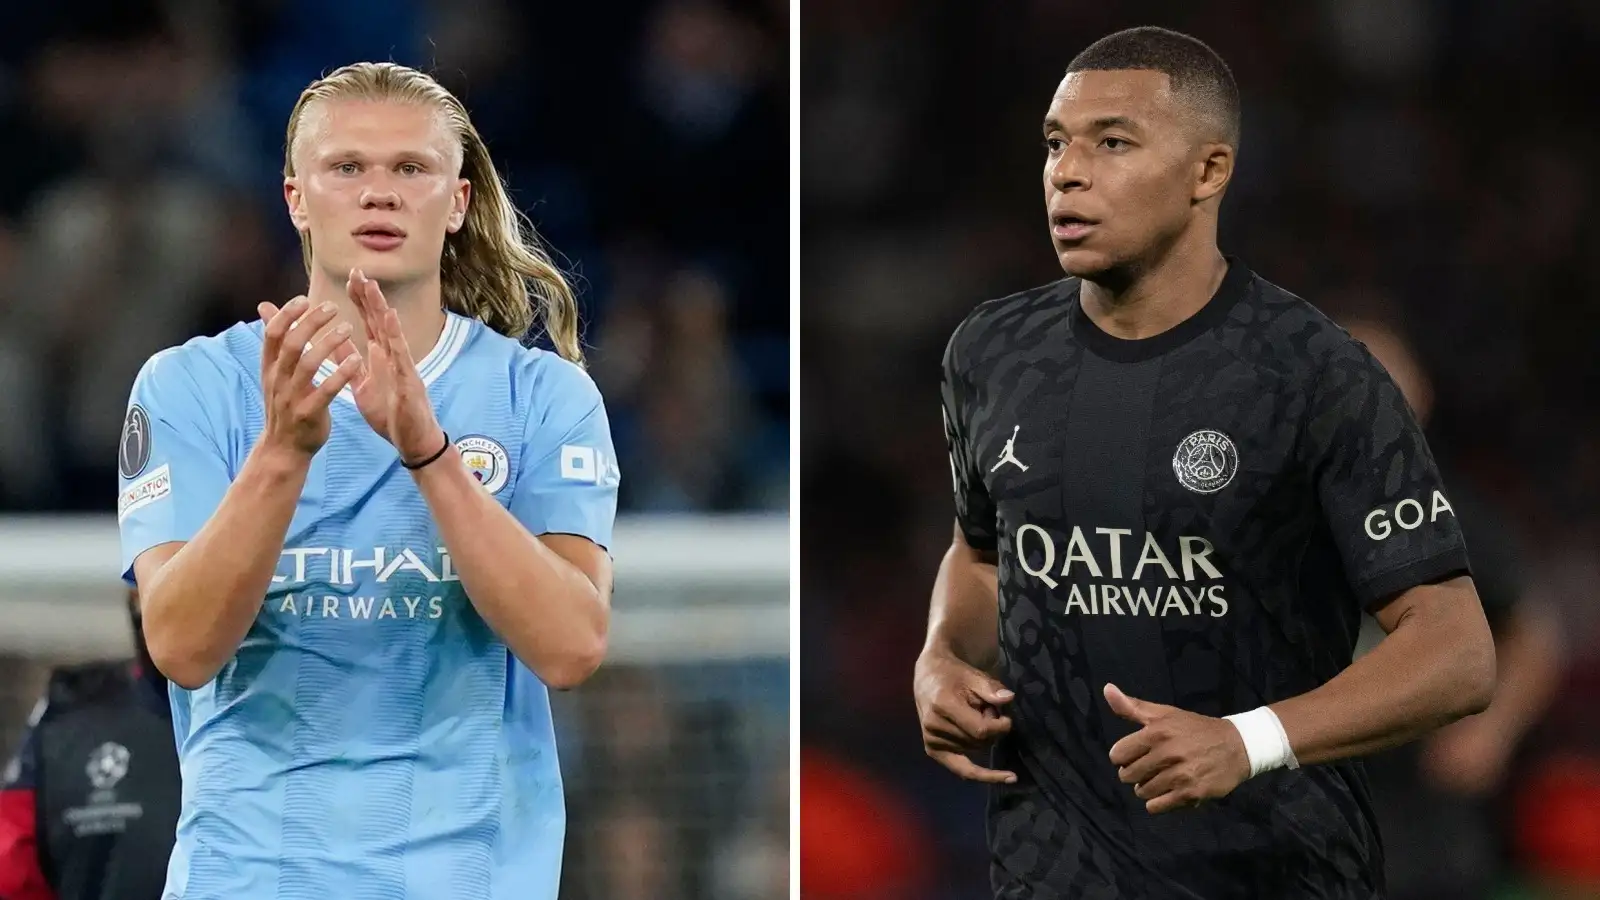 Comparing Erling Haaland and Kylian Mbappe’s records in the Champions League